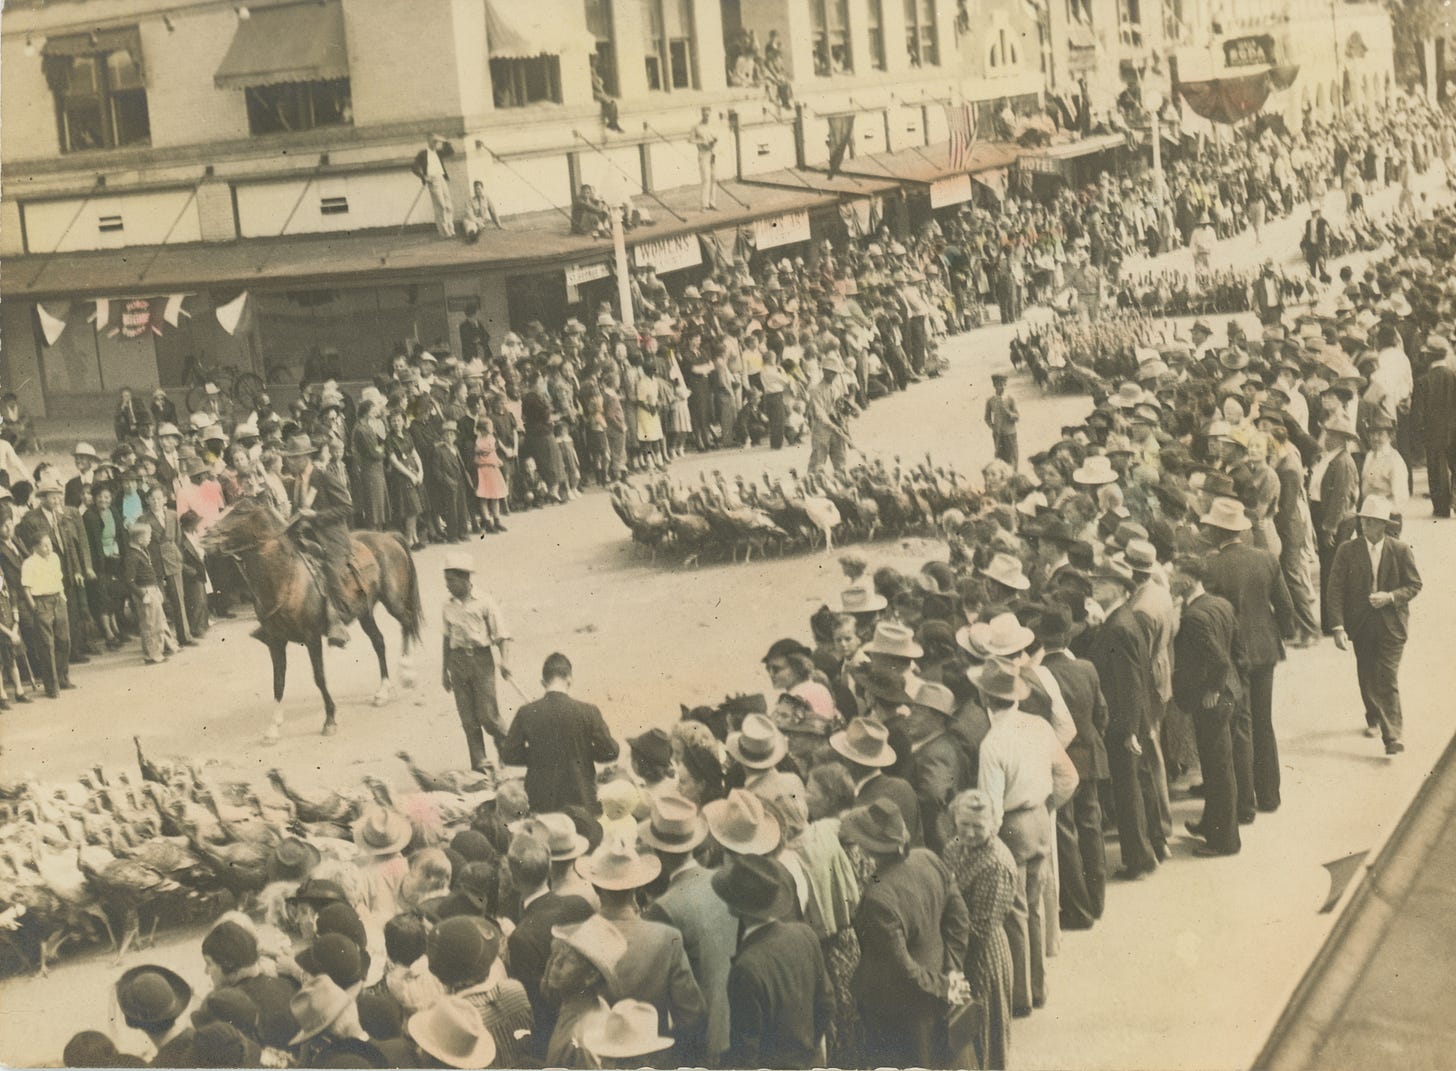 A sepia-tinted black-and-white photo of turkeys being herded down a street lined with spectators, many in cowboy hats. Some spectators are watching from on top of the awnings over the stores lining the street.